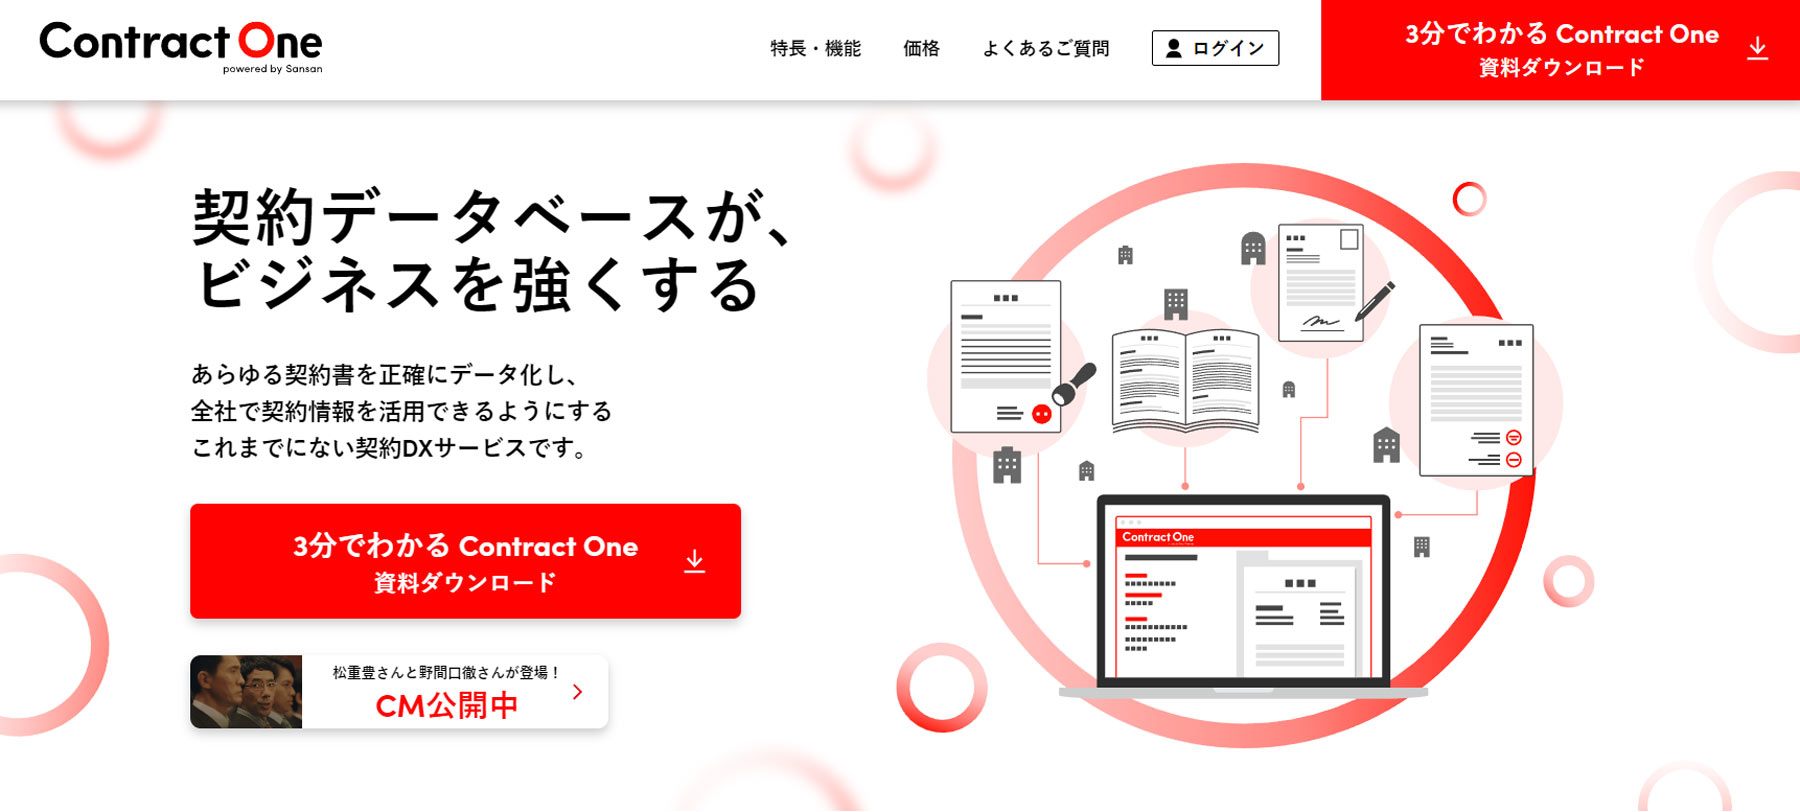 Contract One公式Webサイト